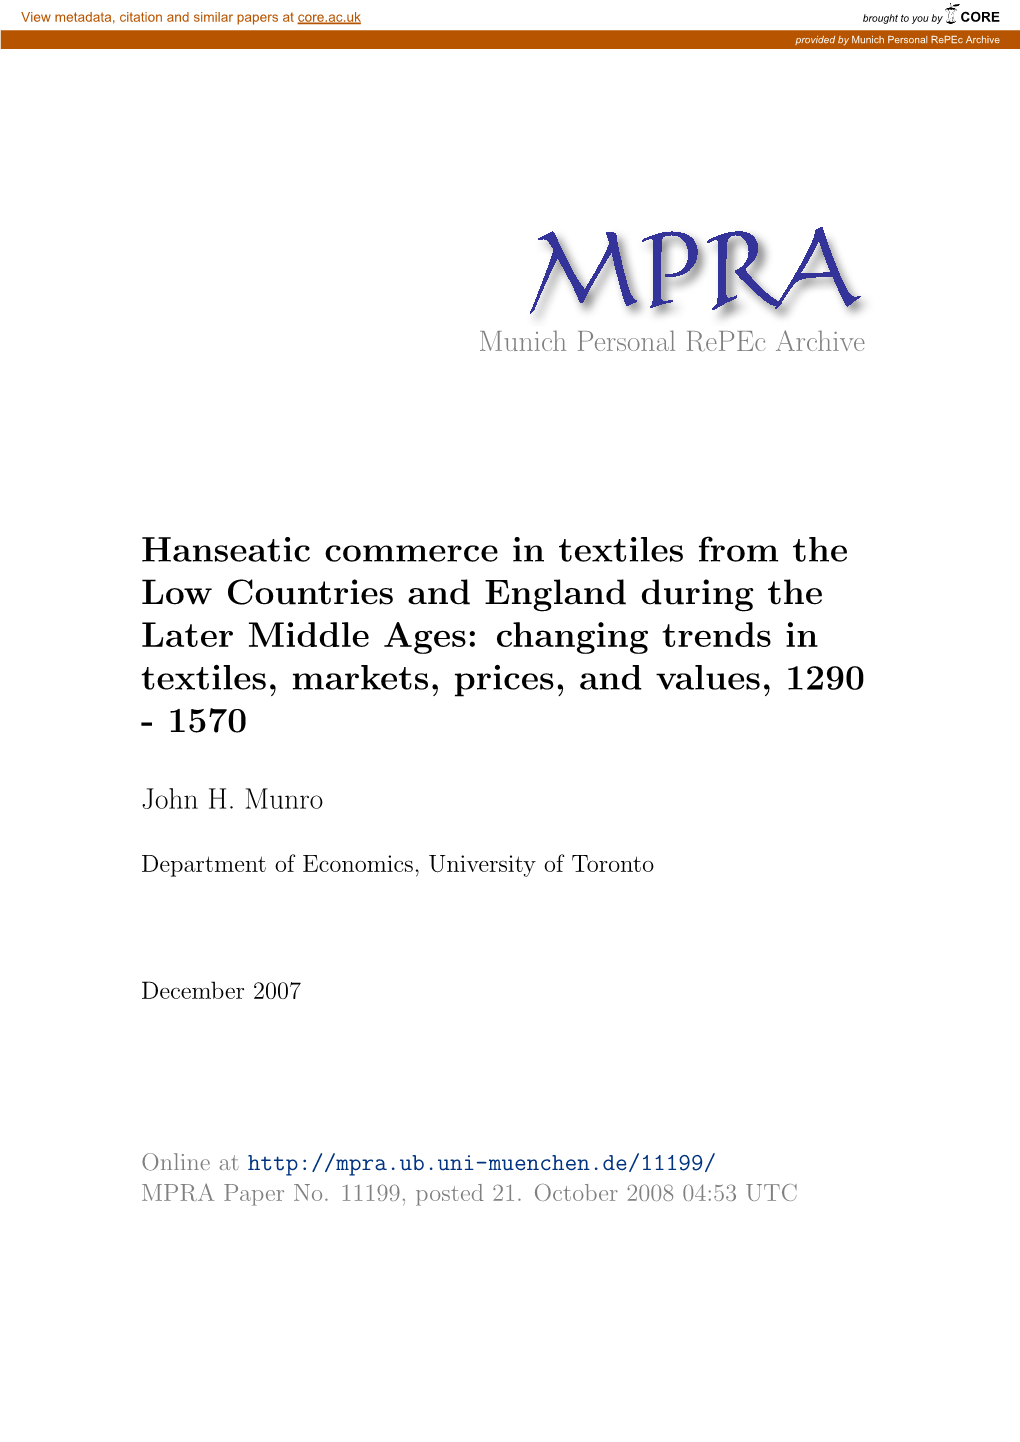 Hanseatic Commerce in Textiles from the Low Countries and England During the Later Middle Ages: Changing Trends in Textiles, Markets, Prices, and Values, 1290 - 1570